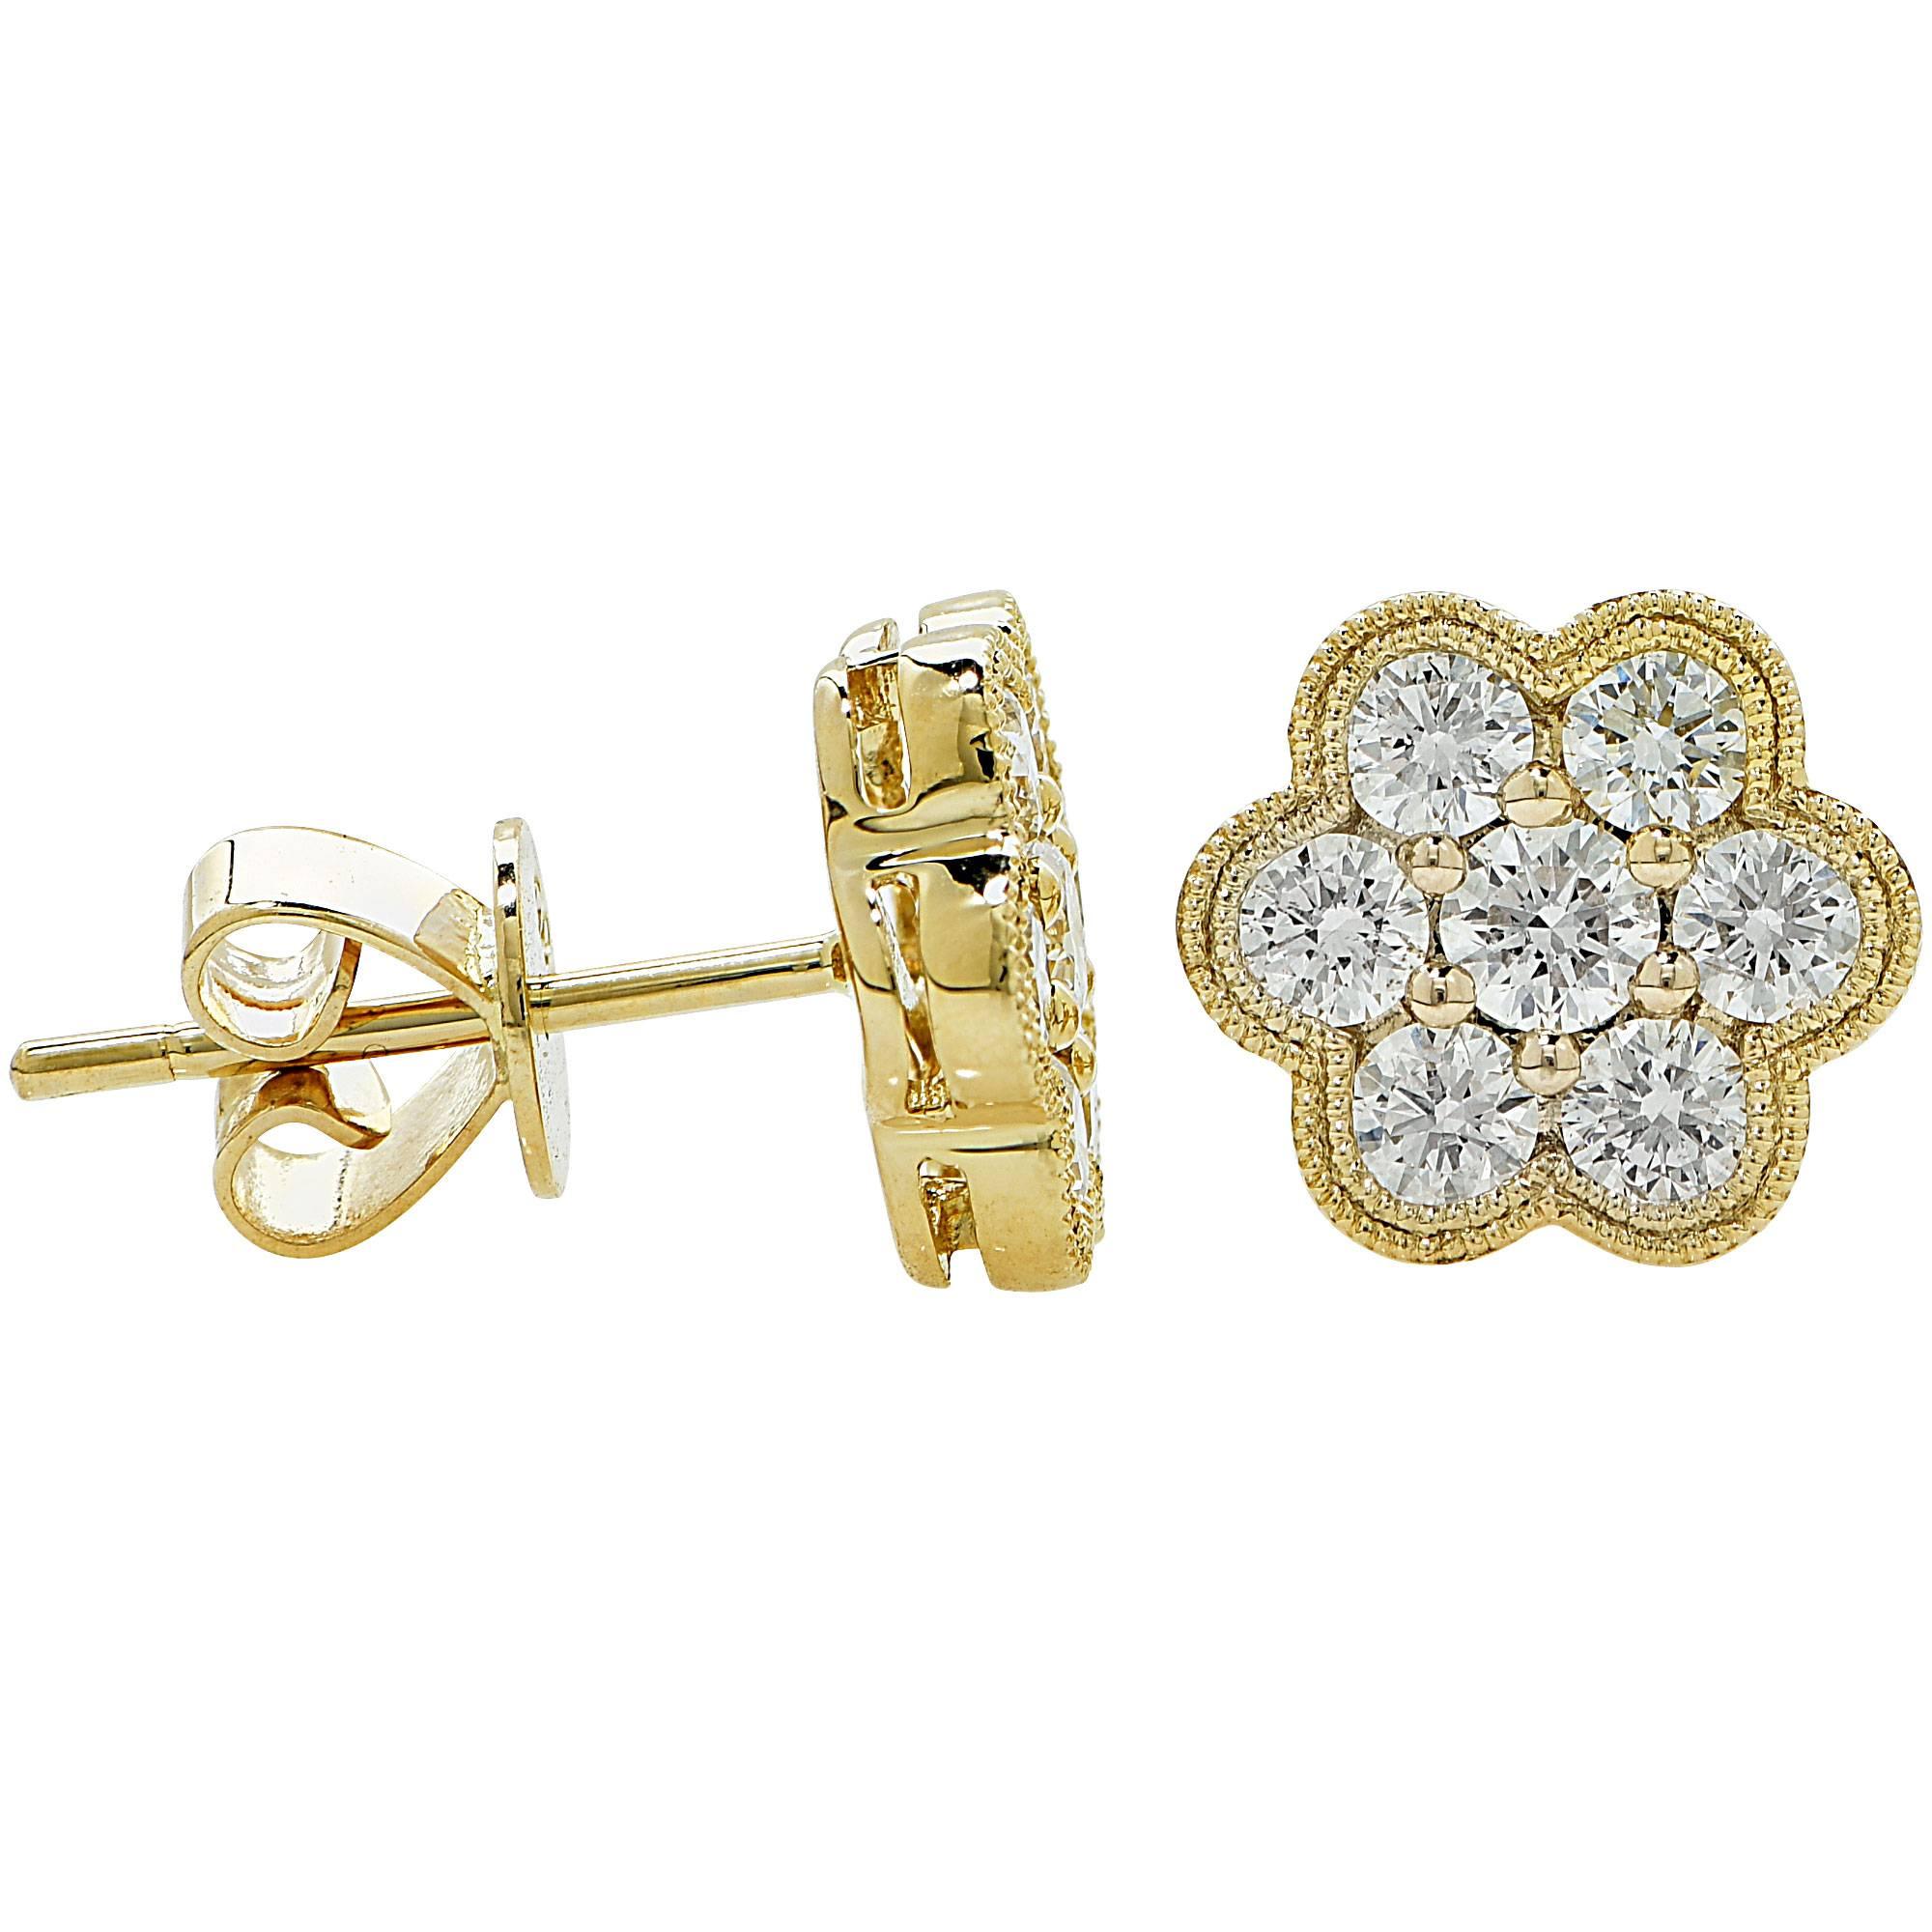 14k yellow gold cluster earrings featuring 14 round brilliant cut diamonds weighing 1ct total G color VS clarity.

It is stamped and tested as 14k gold.
The metal weight is 2.17 grams.

These diamond earrings are accompanied by a retail